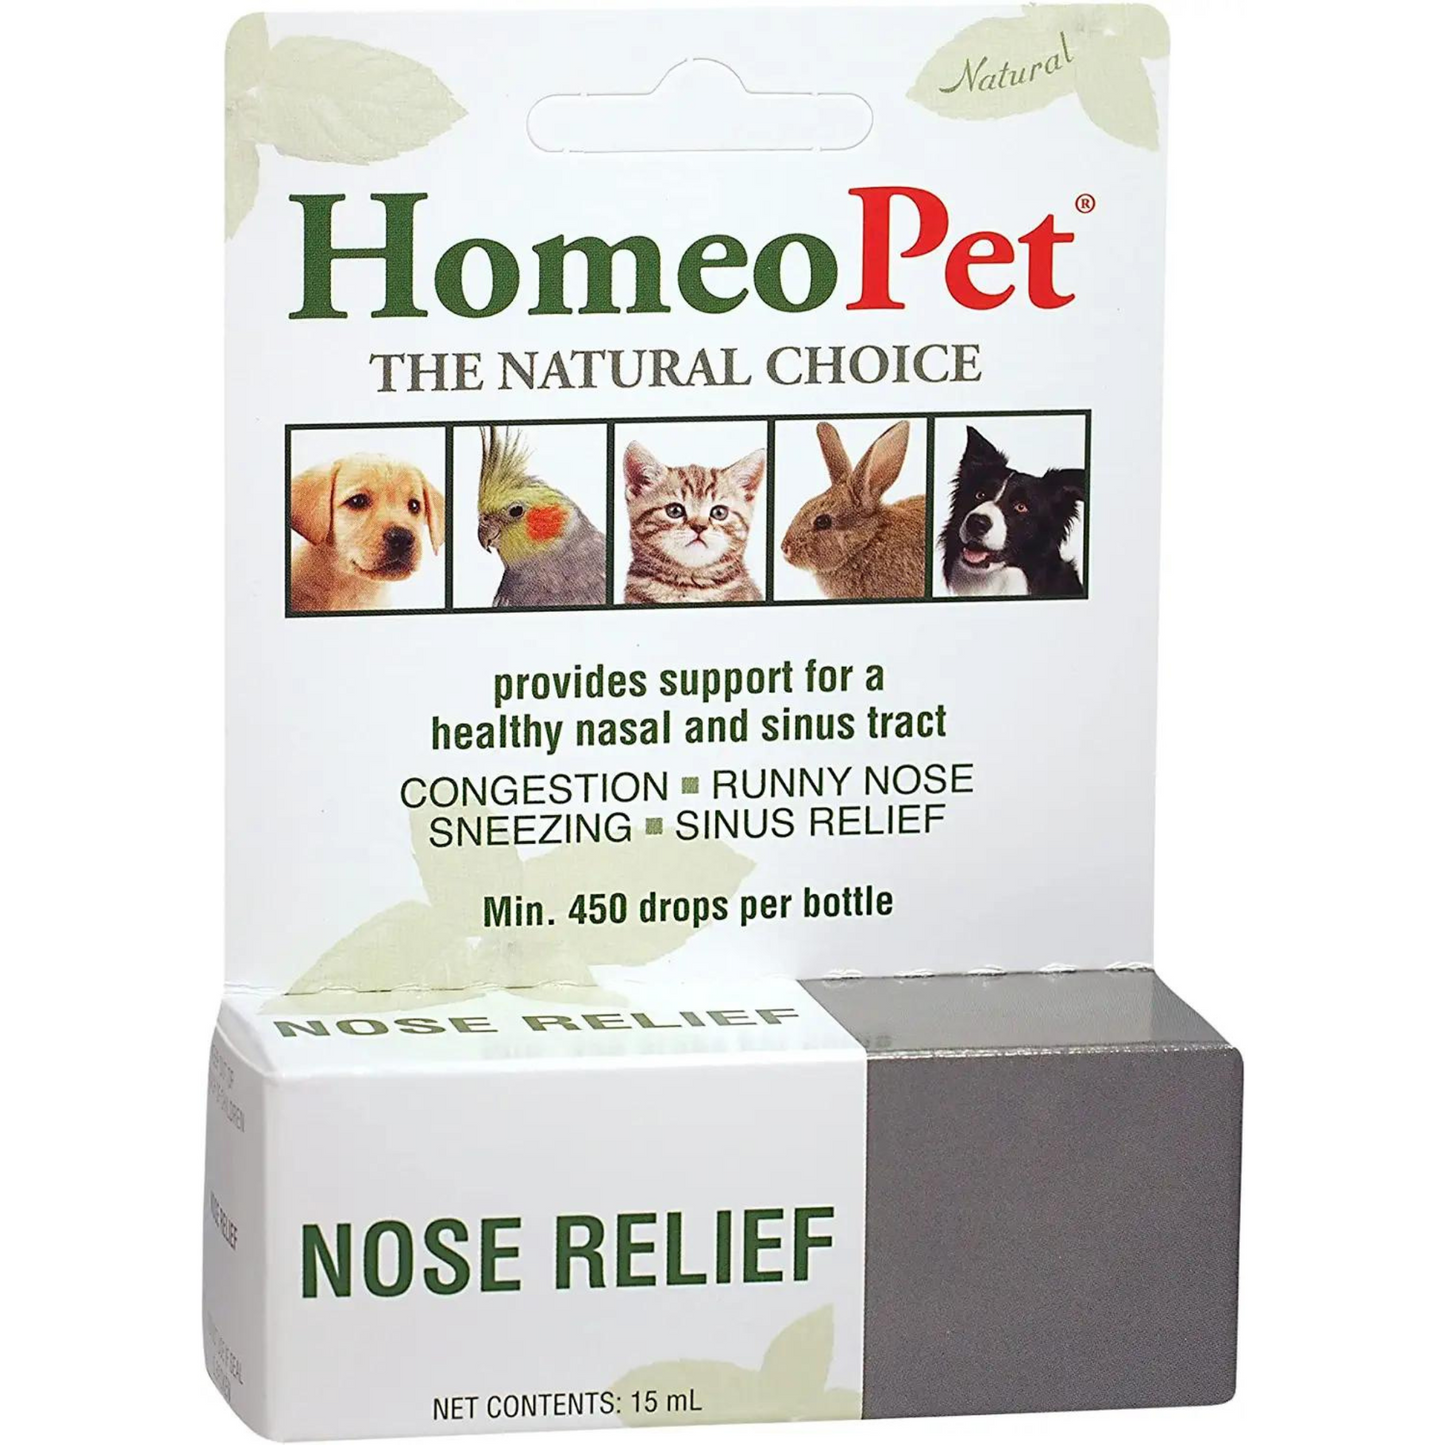 Primary image of Nose Relief Remedy